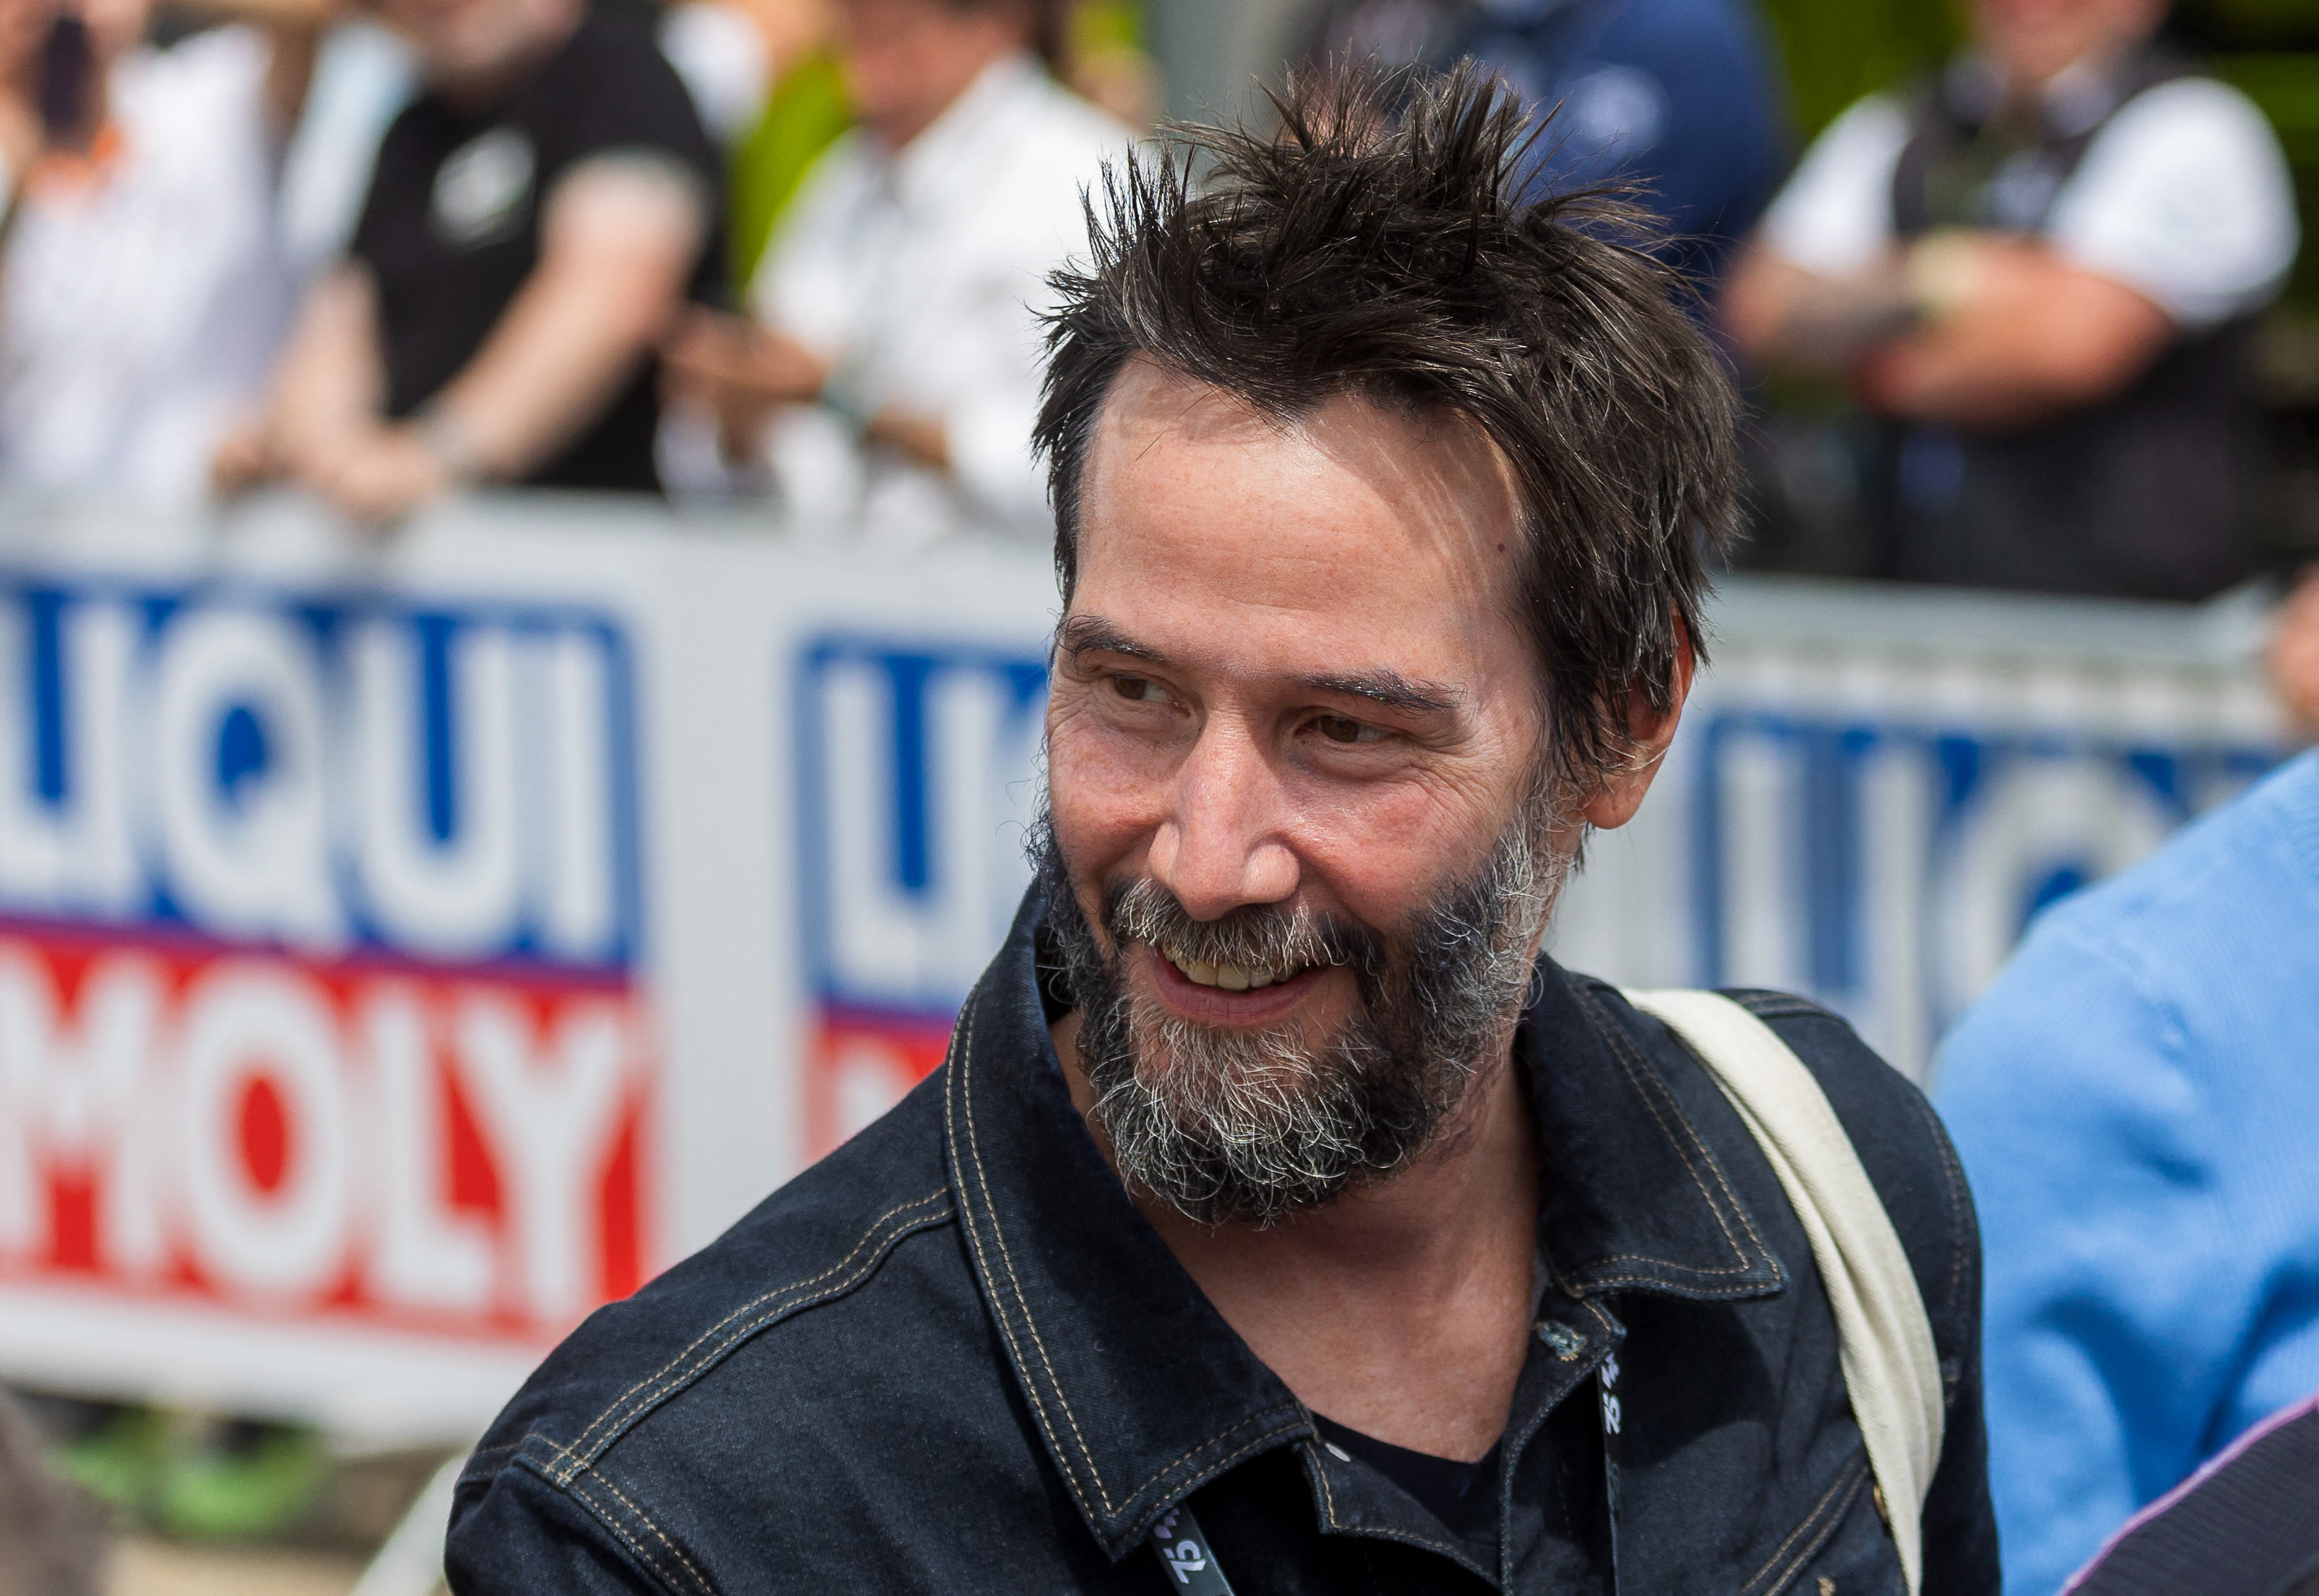 The surprisingly sweet reason Keanu Reeves thinks about death 'all the time